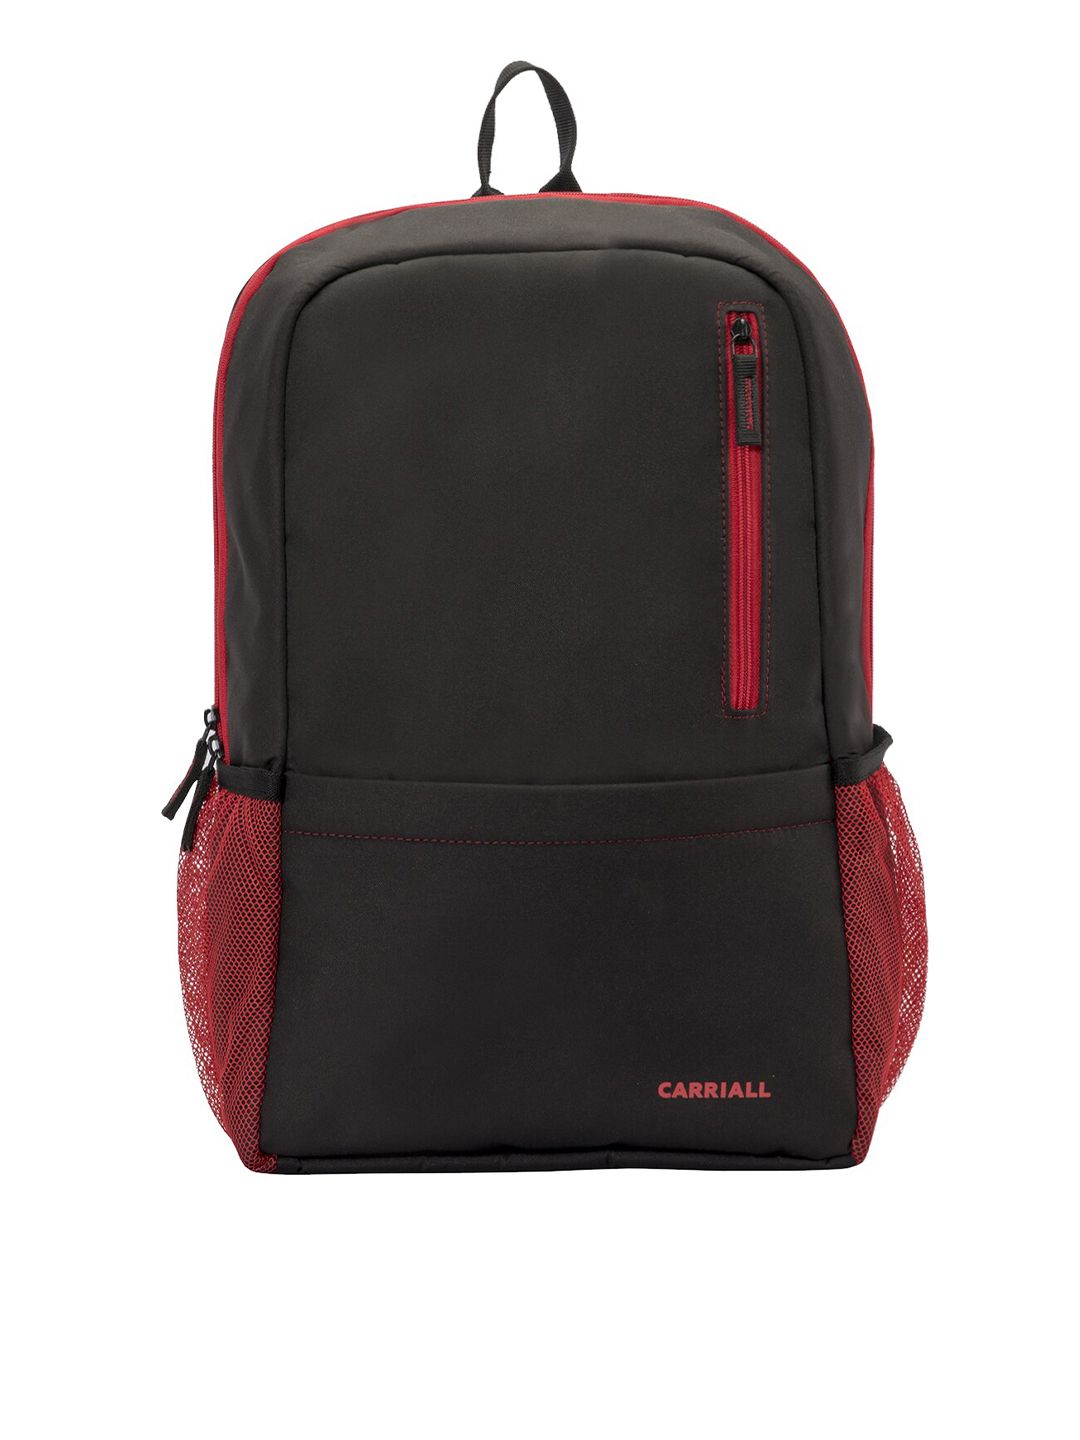 CARRIALL Unisex Red Solid Backpack Price in India